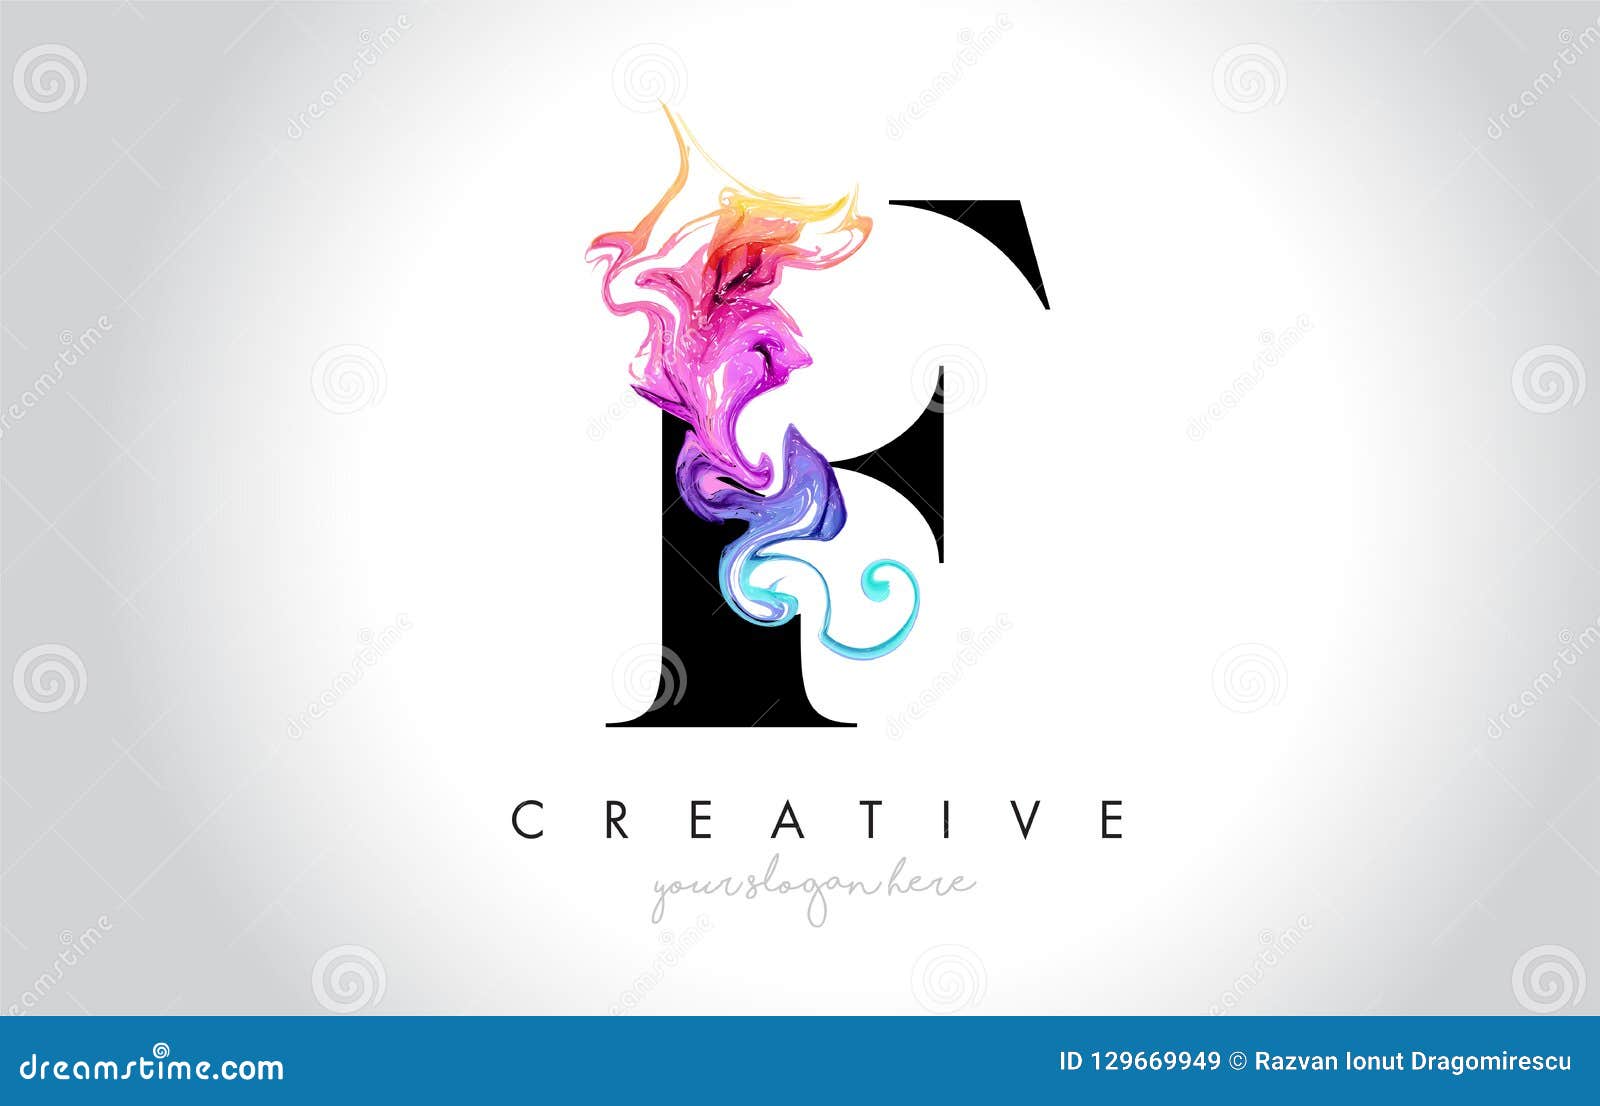 f vibrant creative leter logo  with colorful smoke ink flo